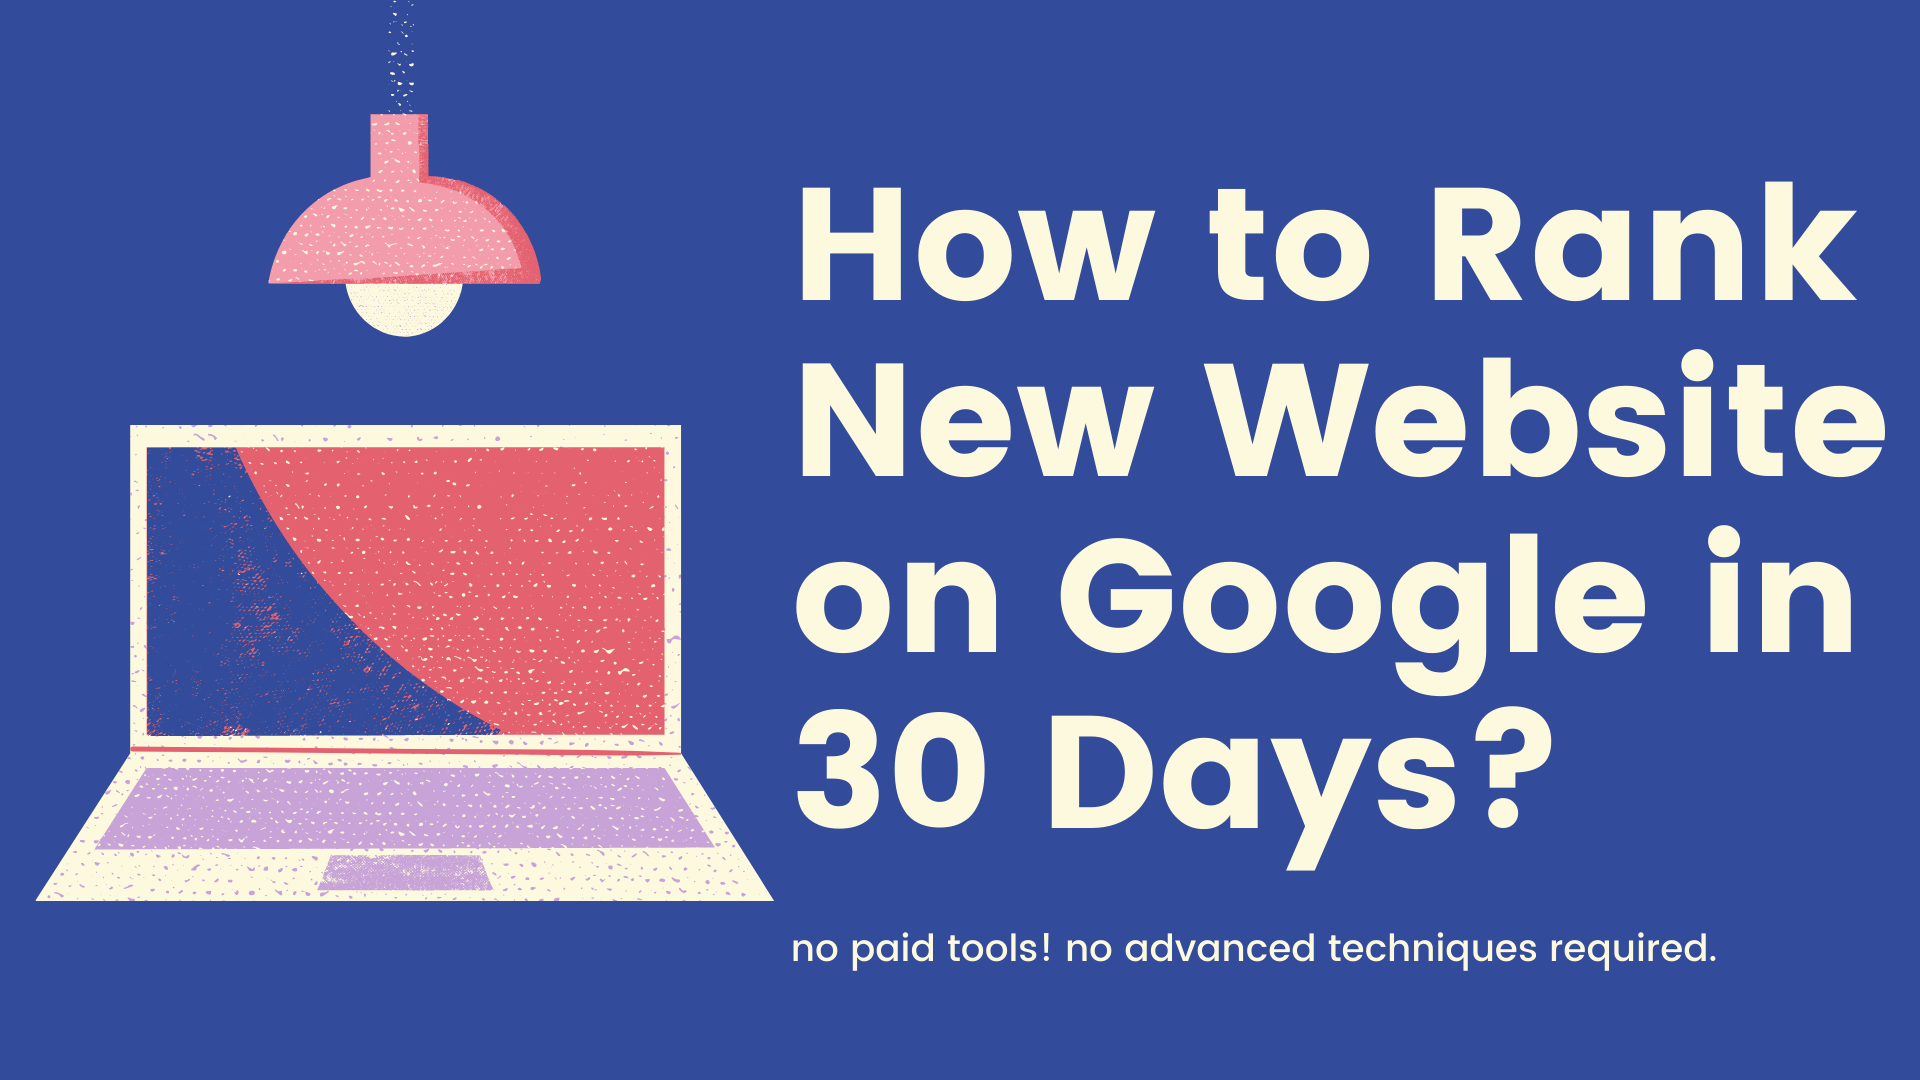 How to Rank New Website on Google First Page in 30 Days? [2021]